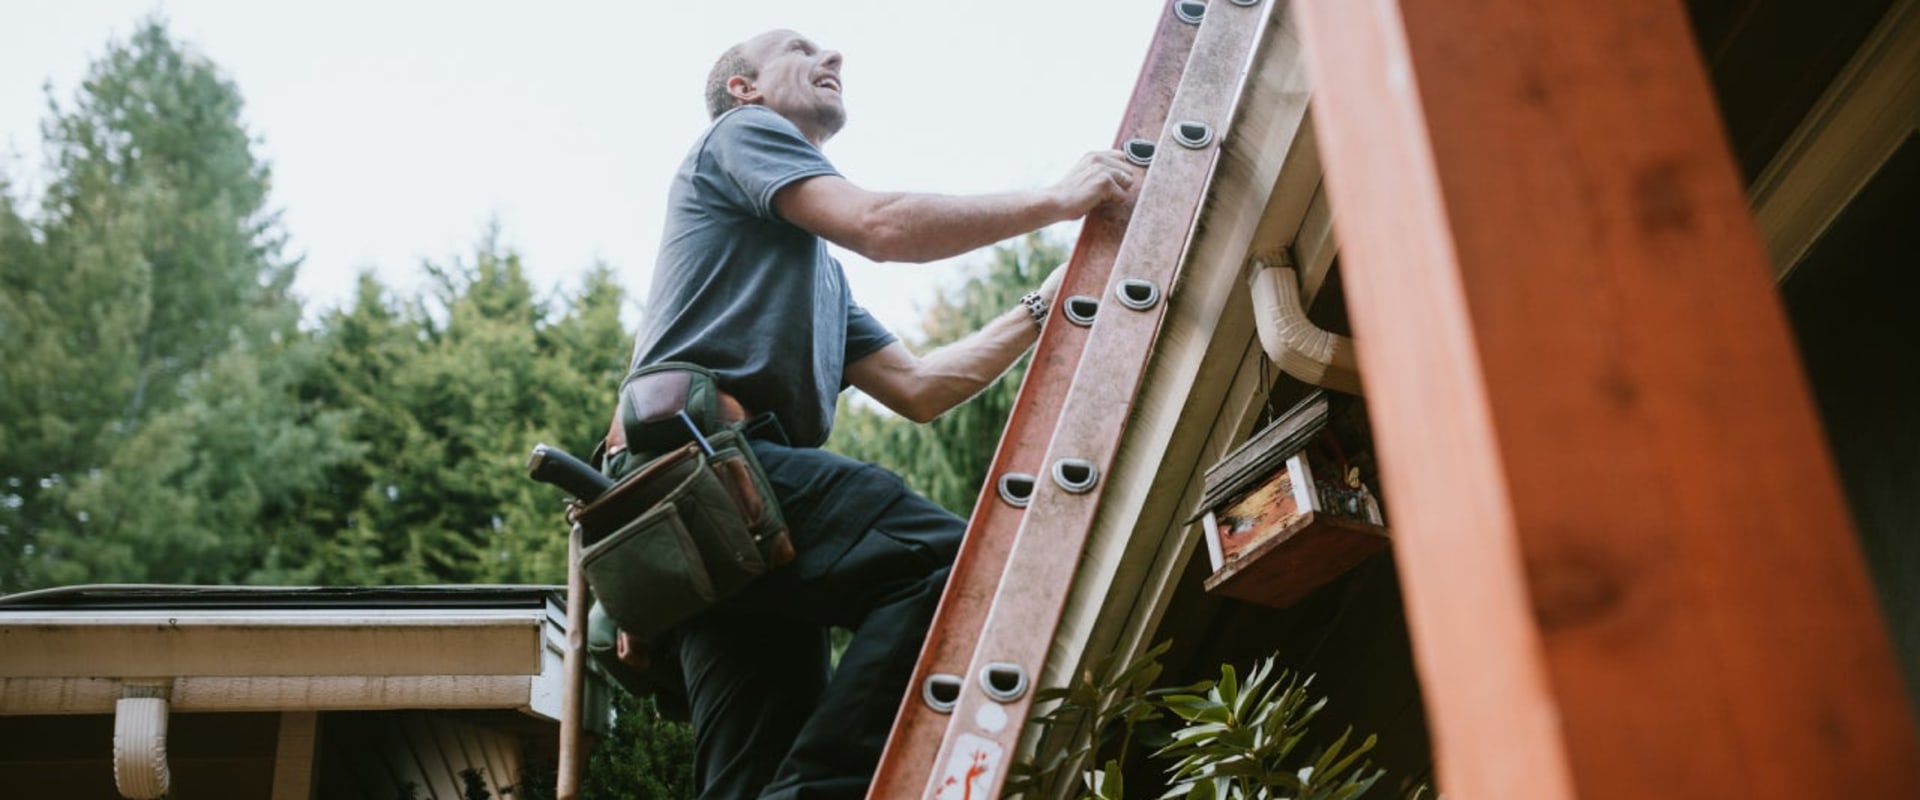 Inspections for Residential Roofs: What You Need to Know